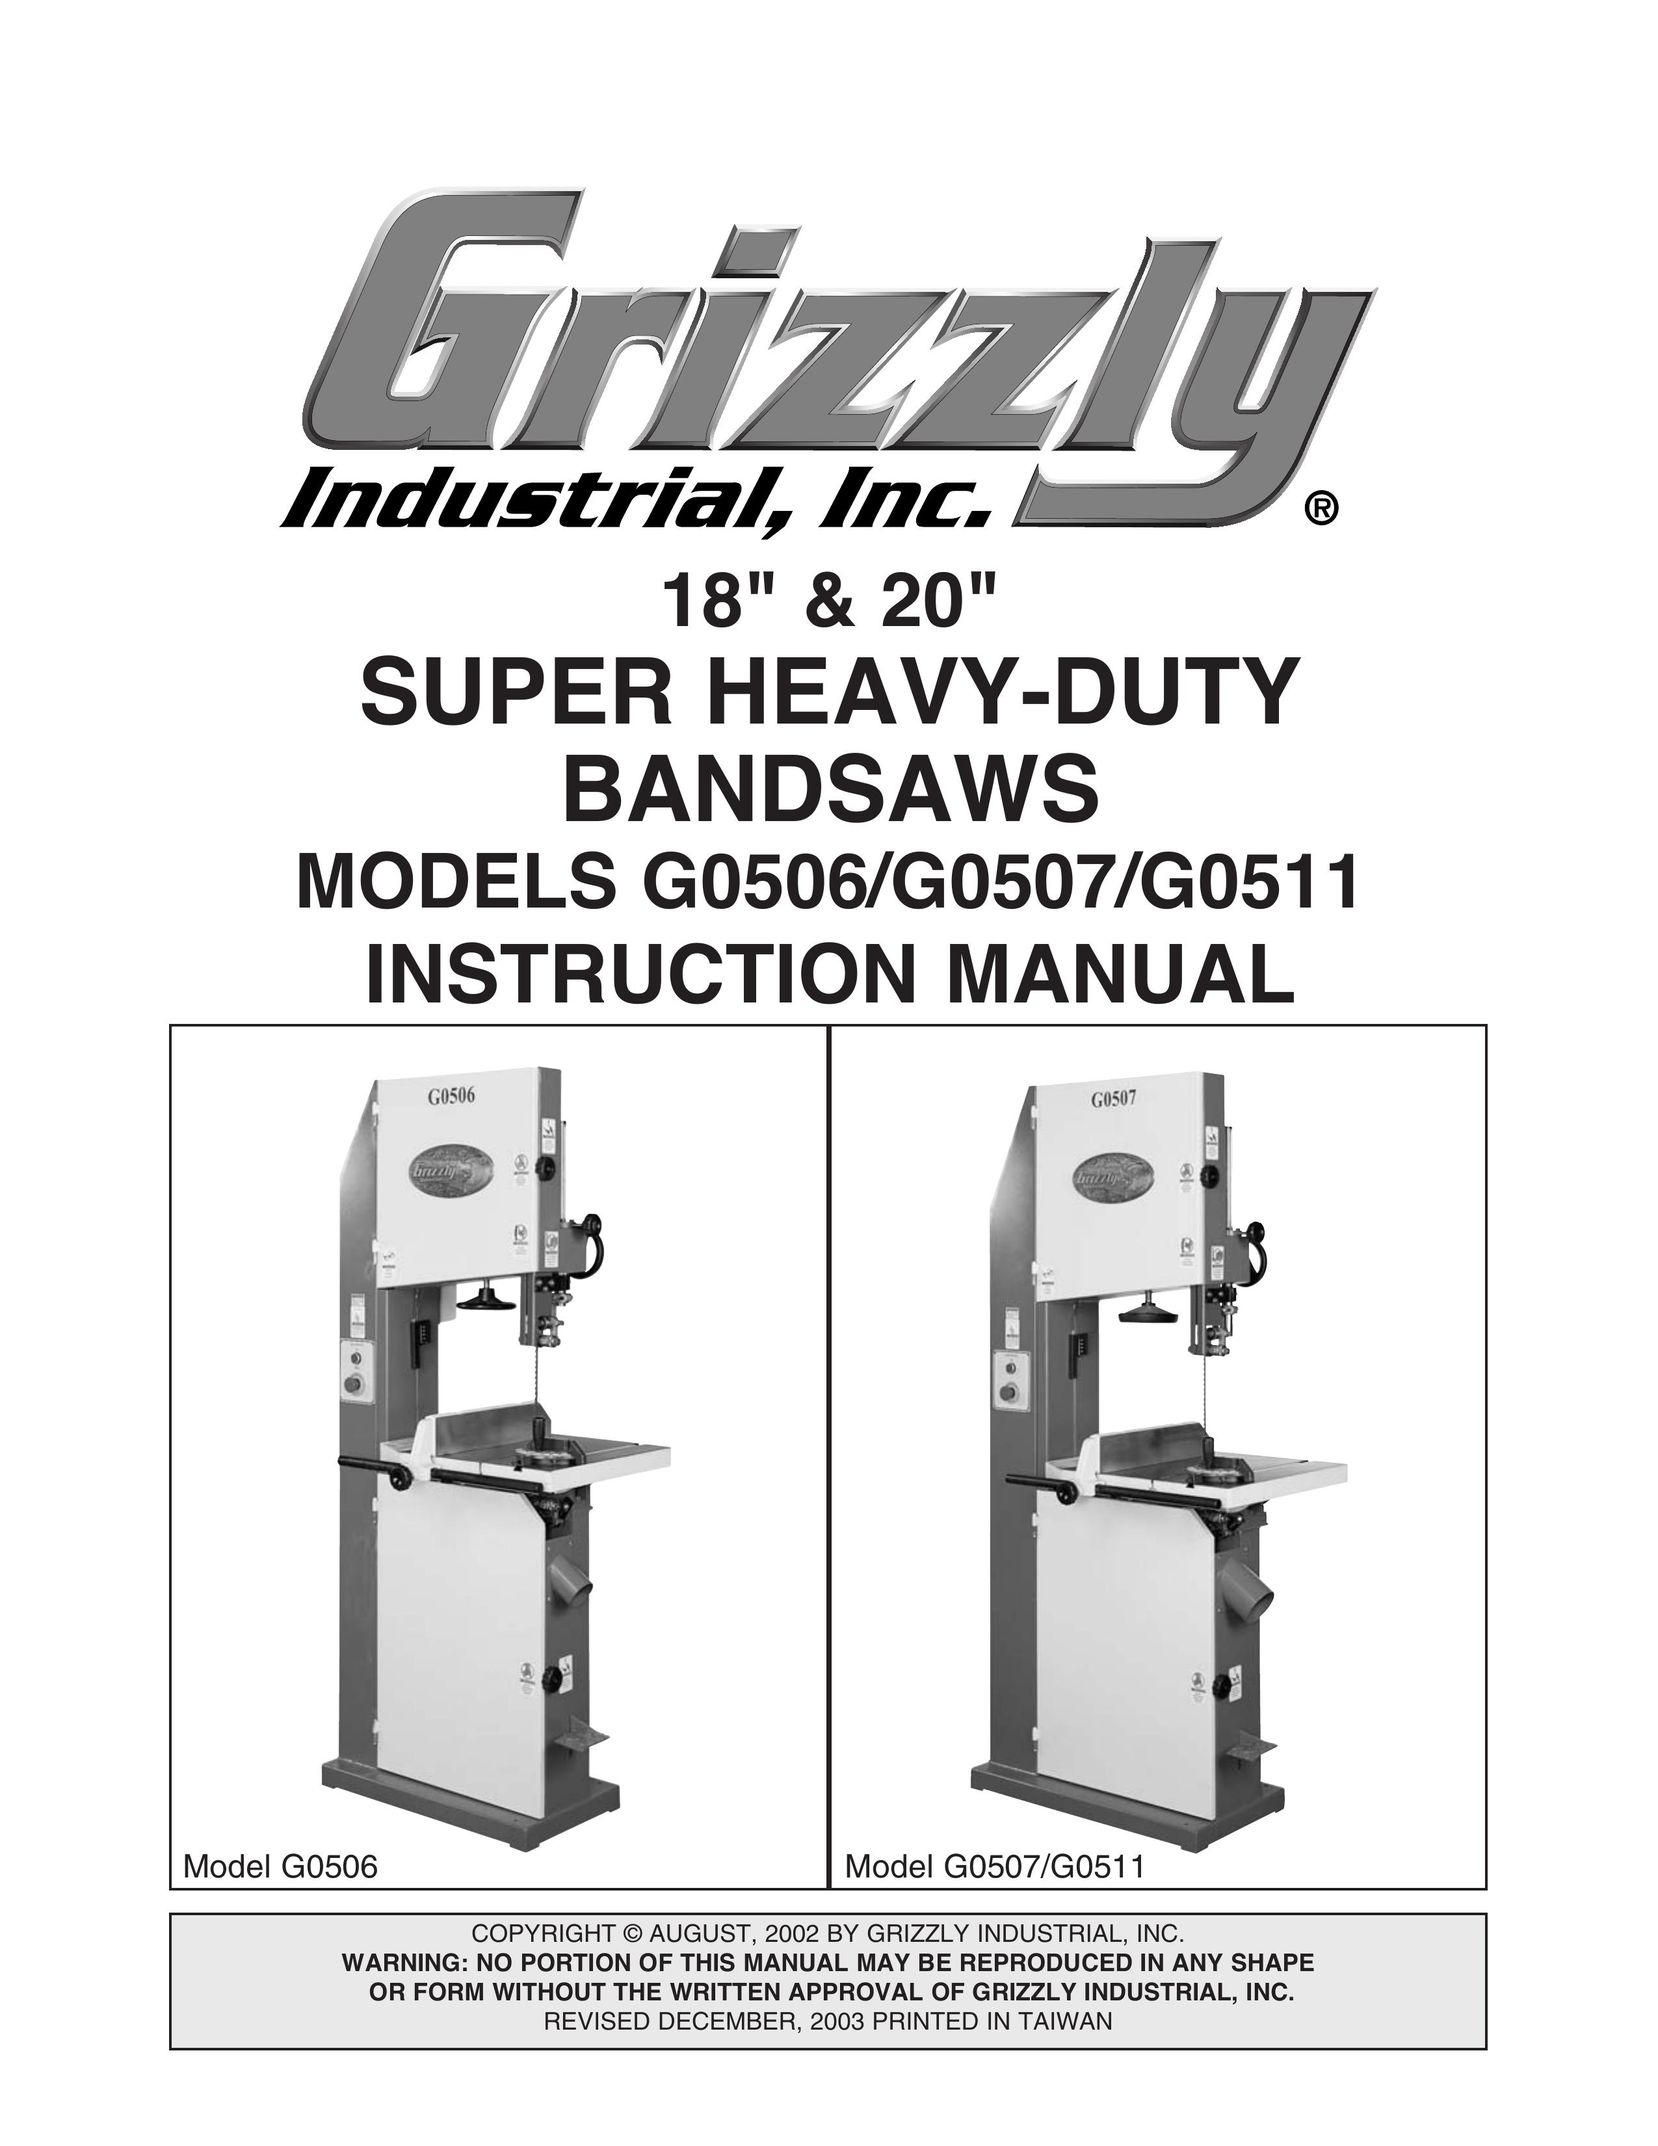 Grizzly G0511 Saw User Manual